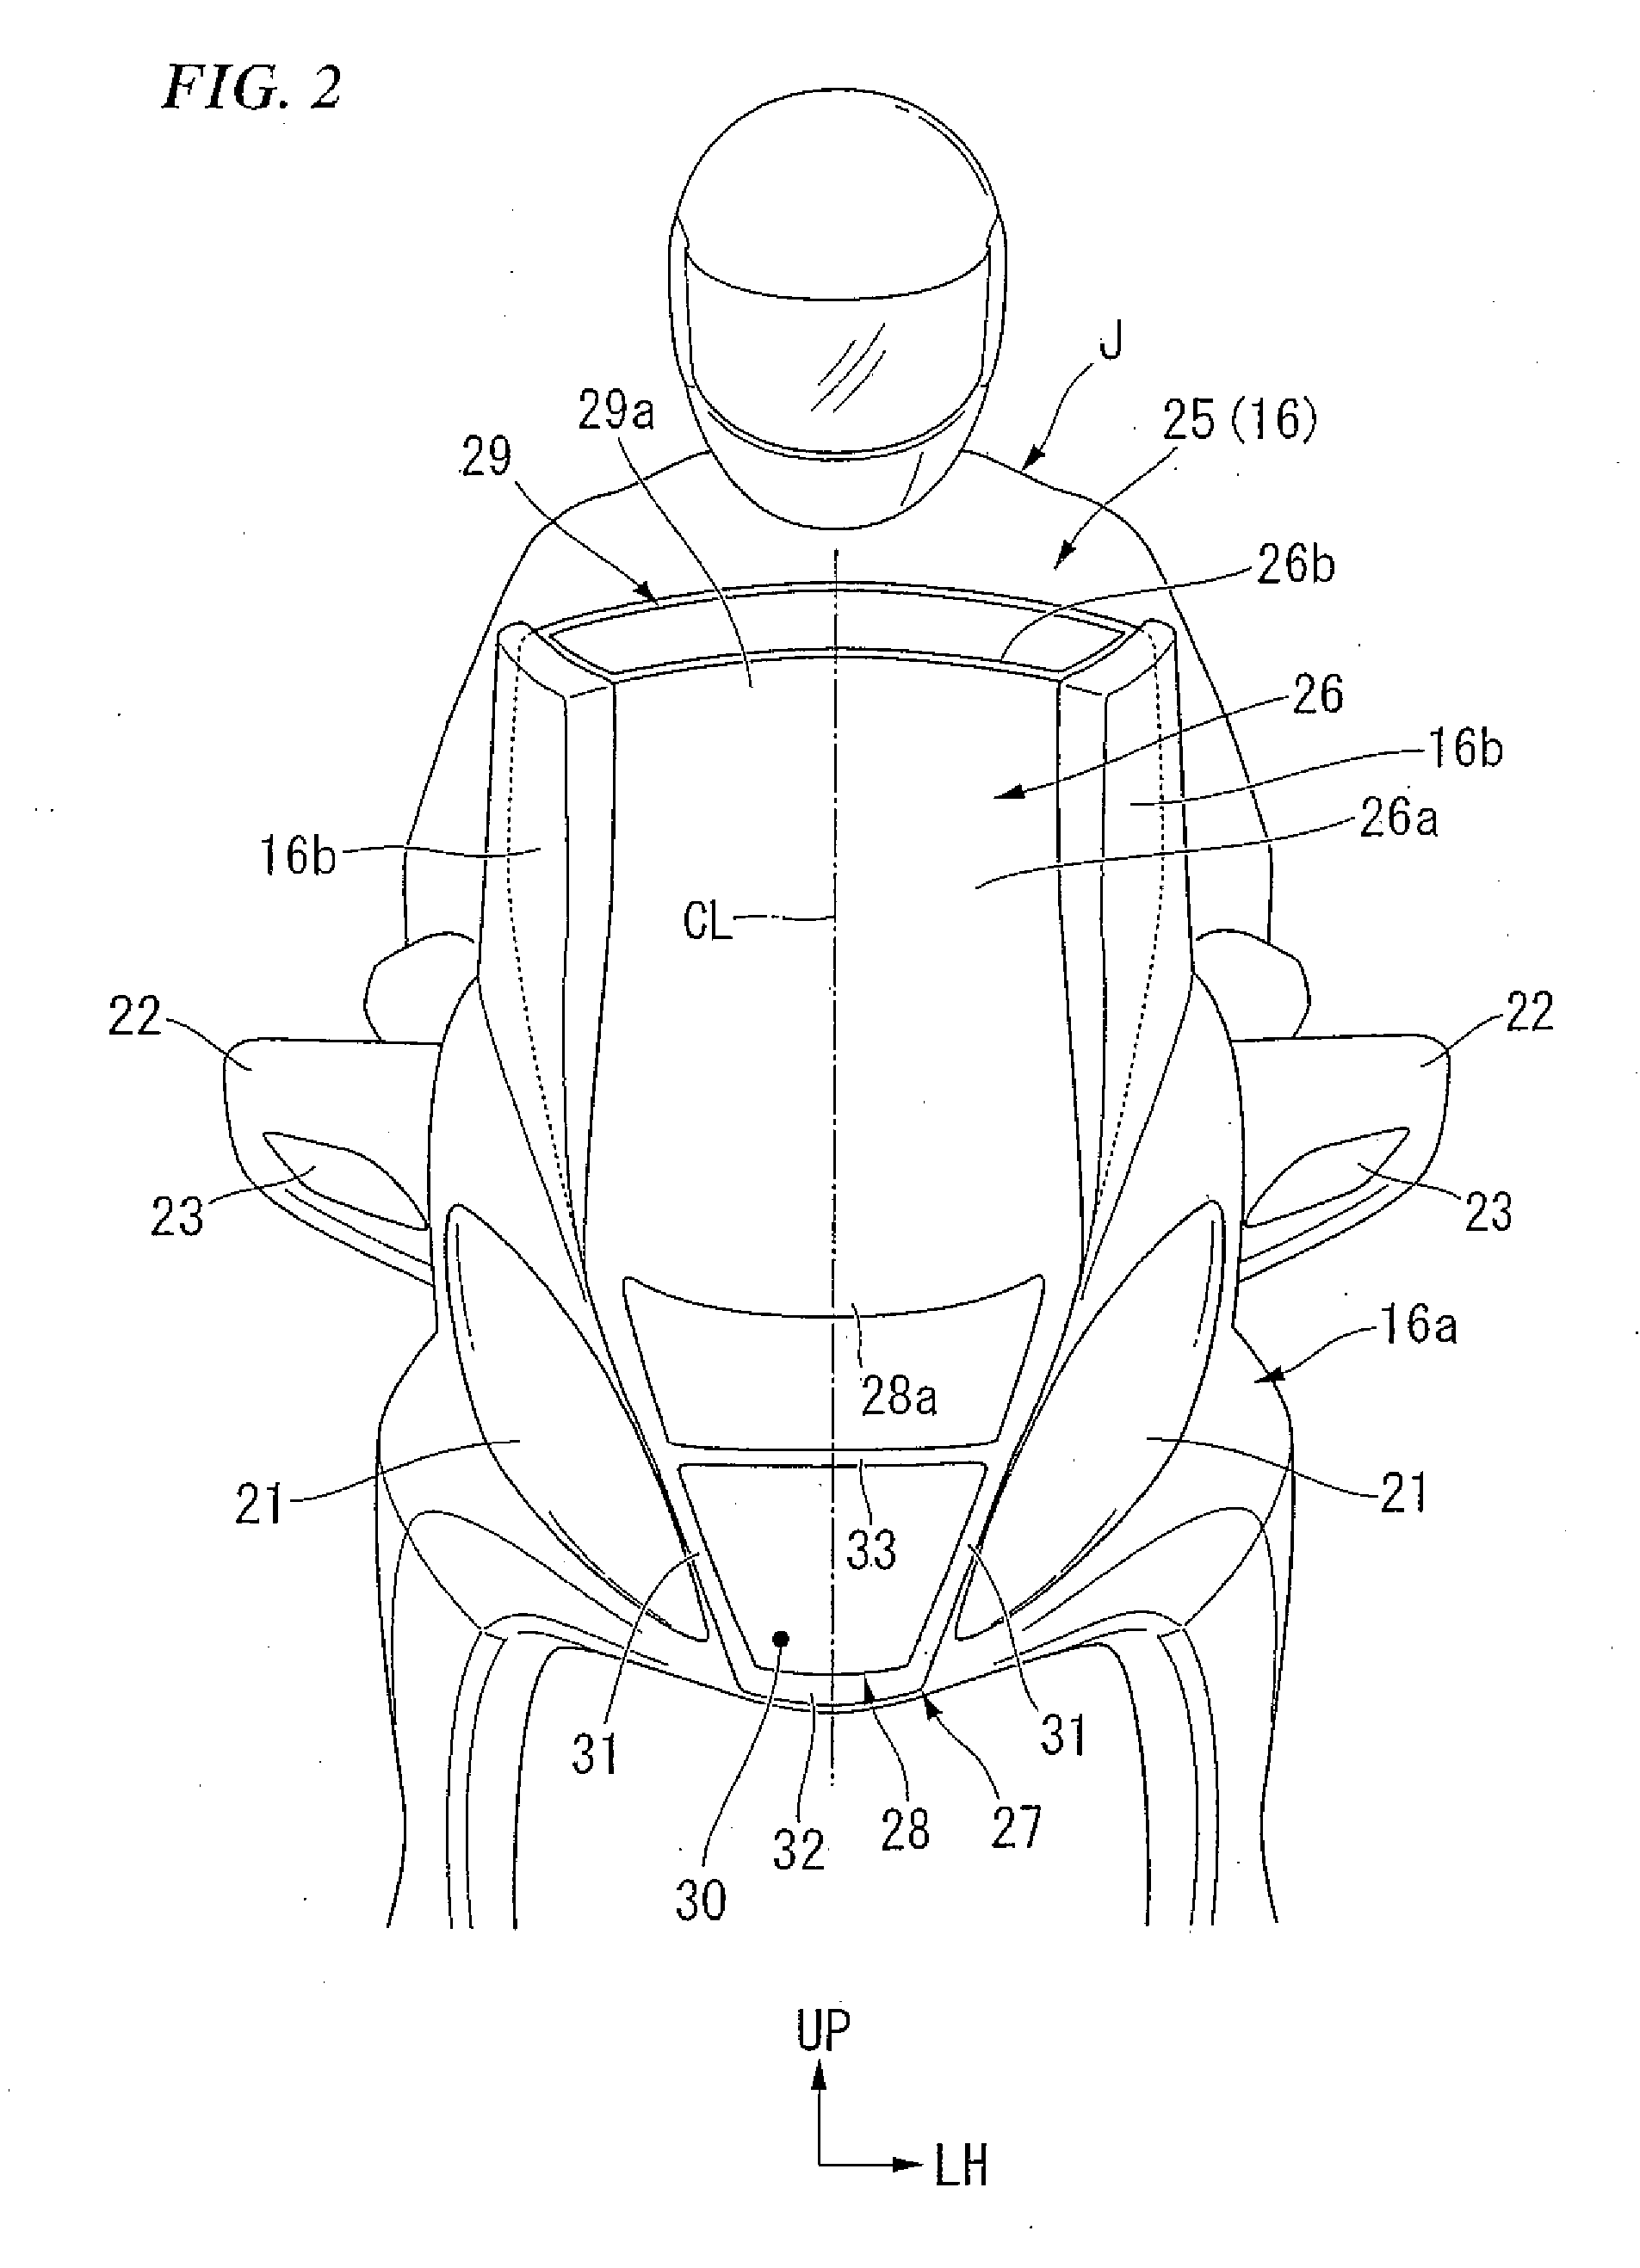 Windshield device, and cool airflow device for saddle ride type vehicle